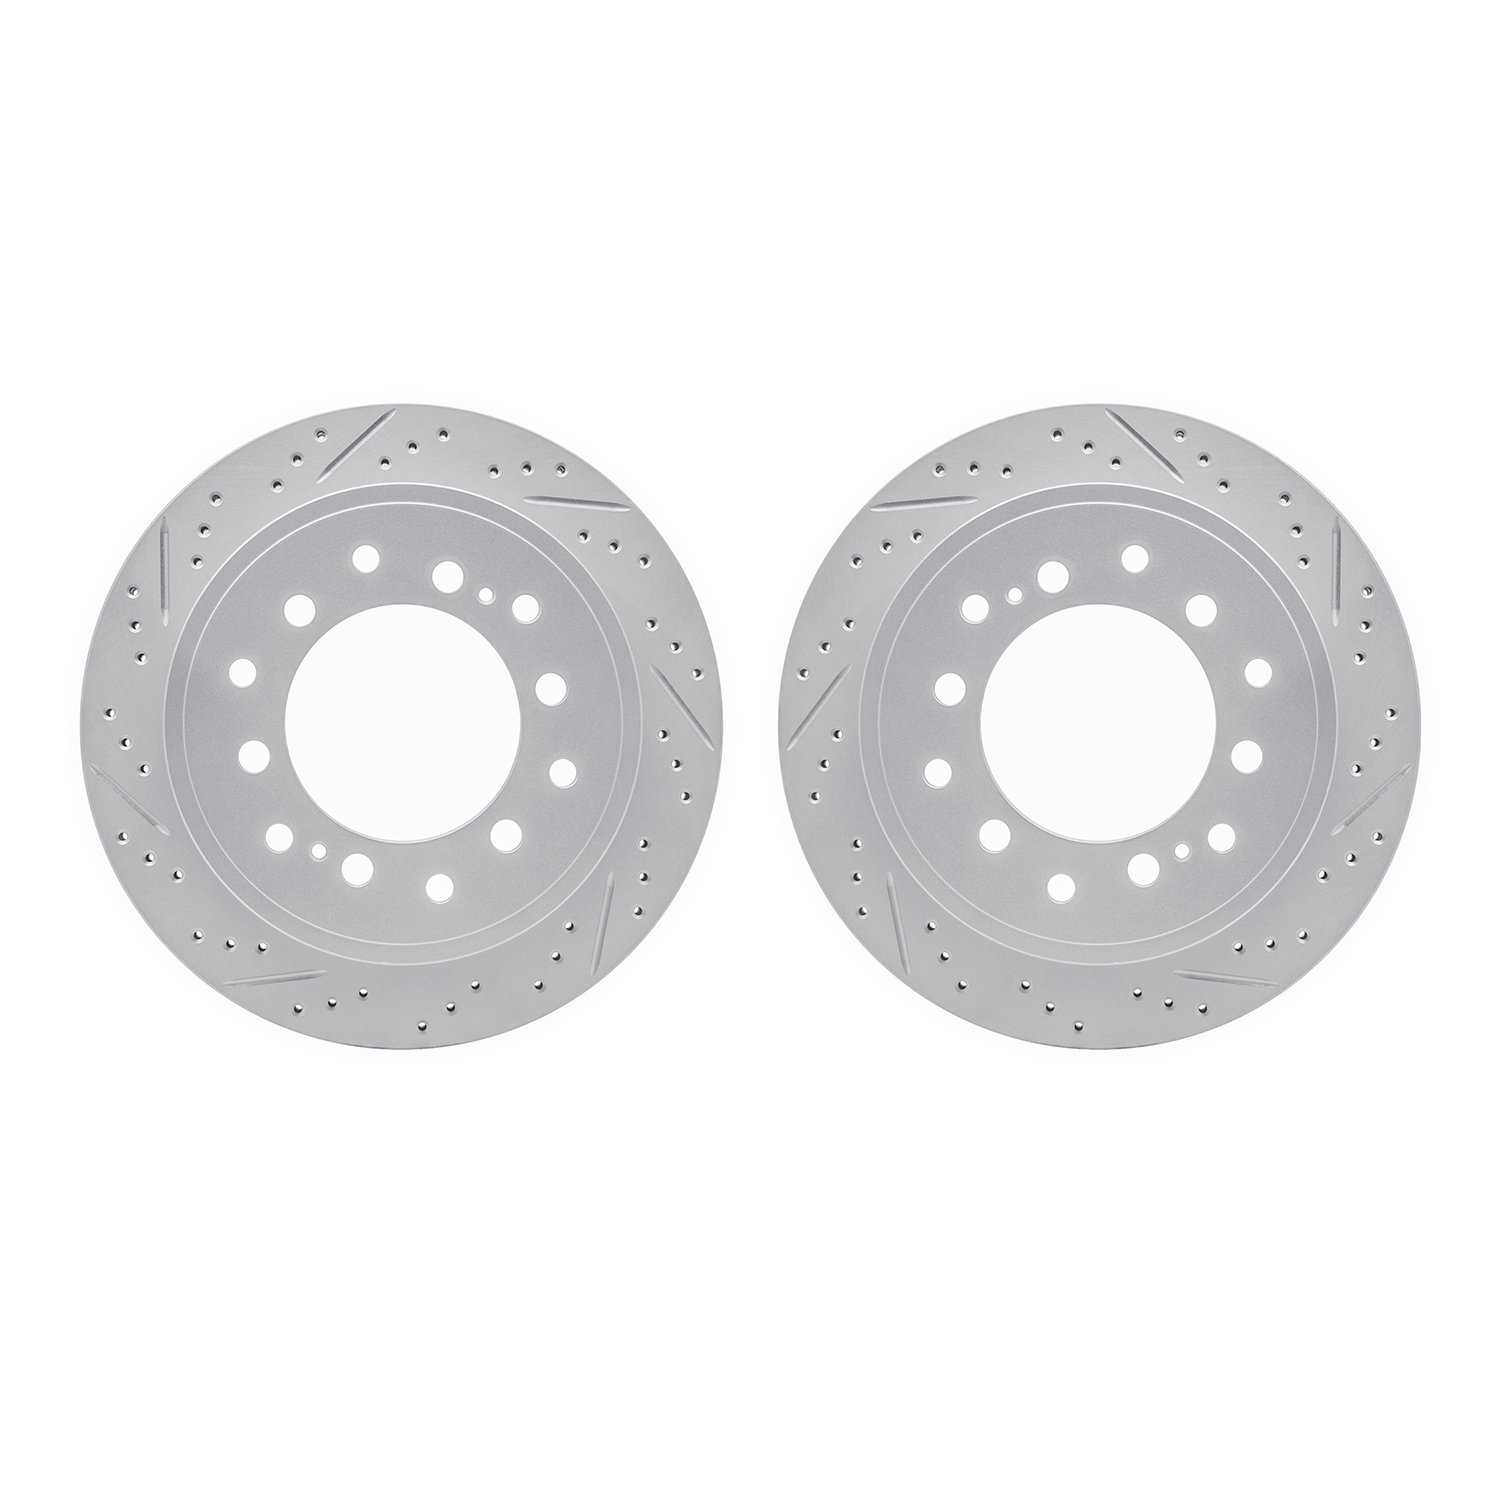 2002-76045 Geoperformance Drilled/Slotted Brake Rotors, Fits Select Lexus/Toyota/Scion, Position: Rear